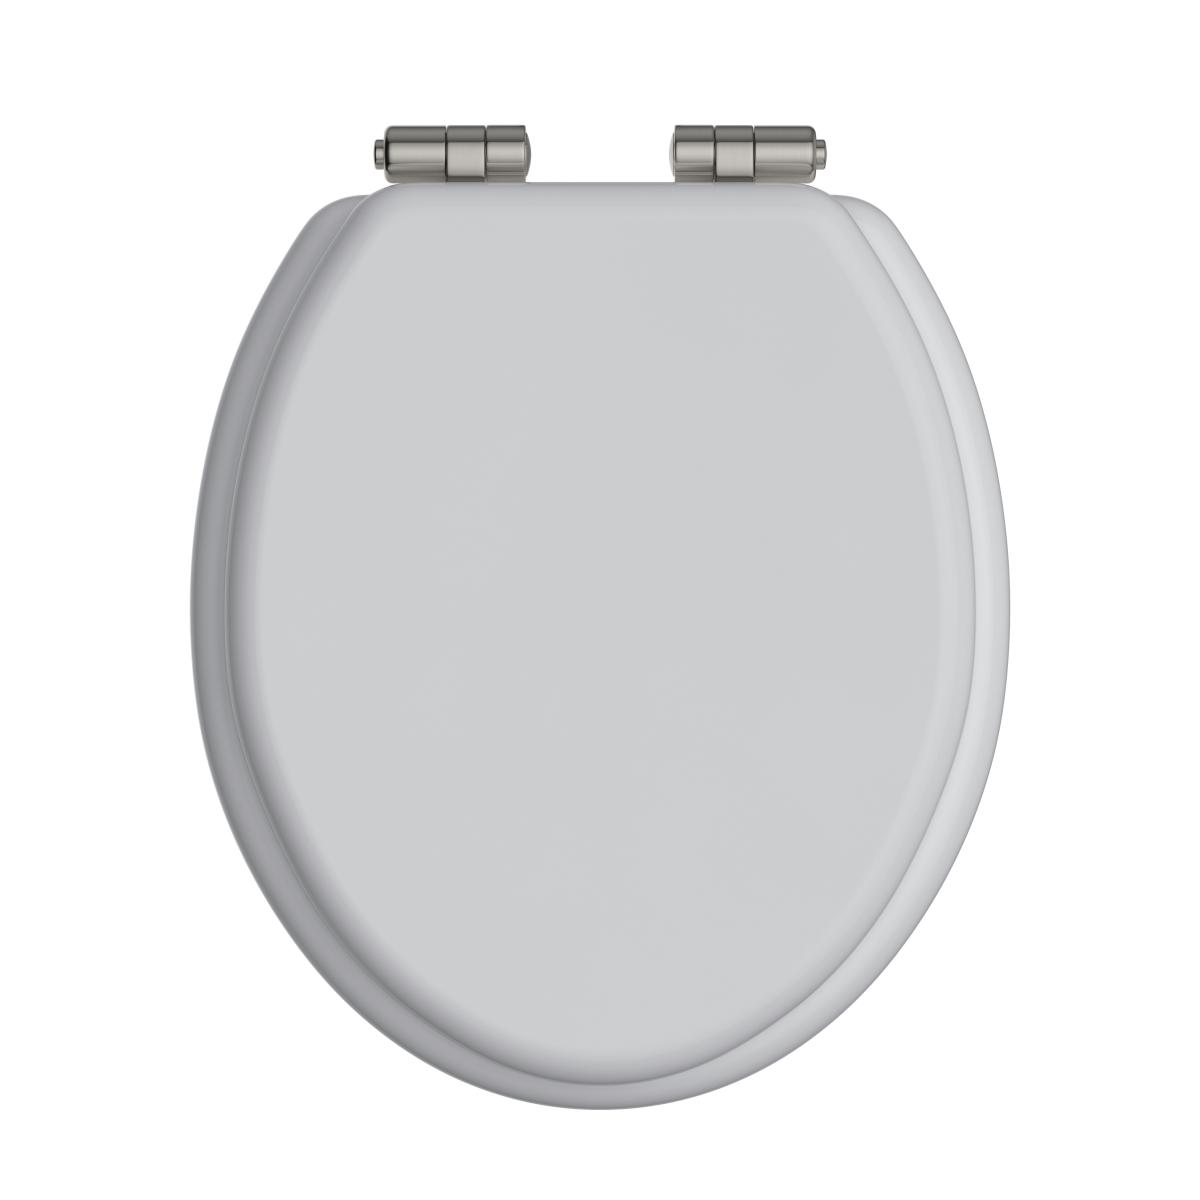 Toilet Seat Soft Close Brushed Nickel Hinges - White Gloss